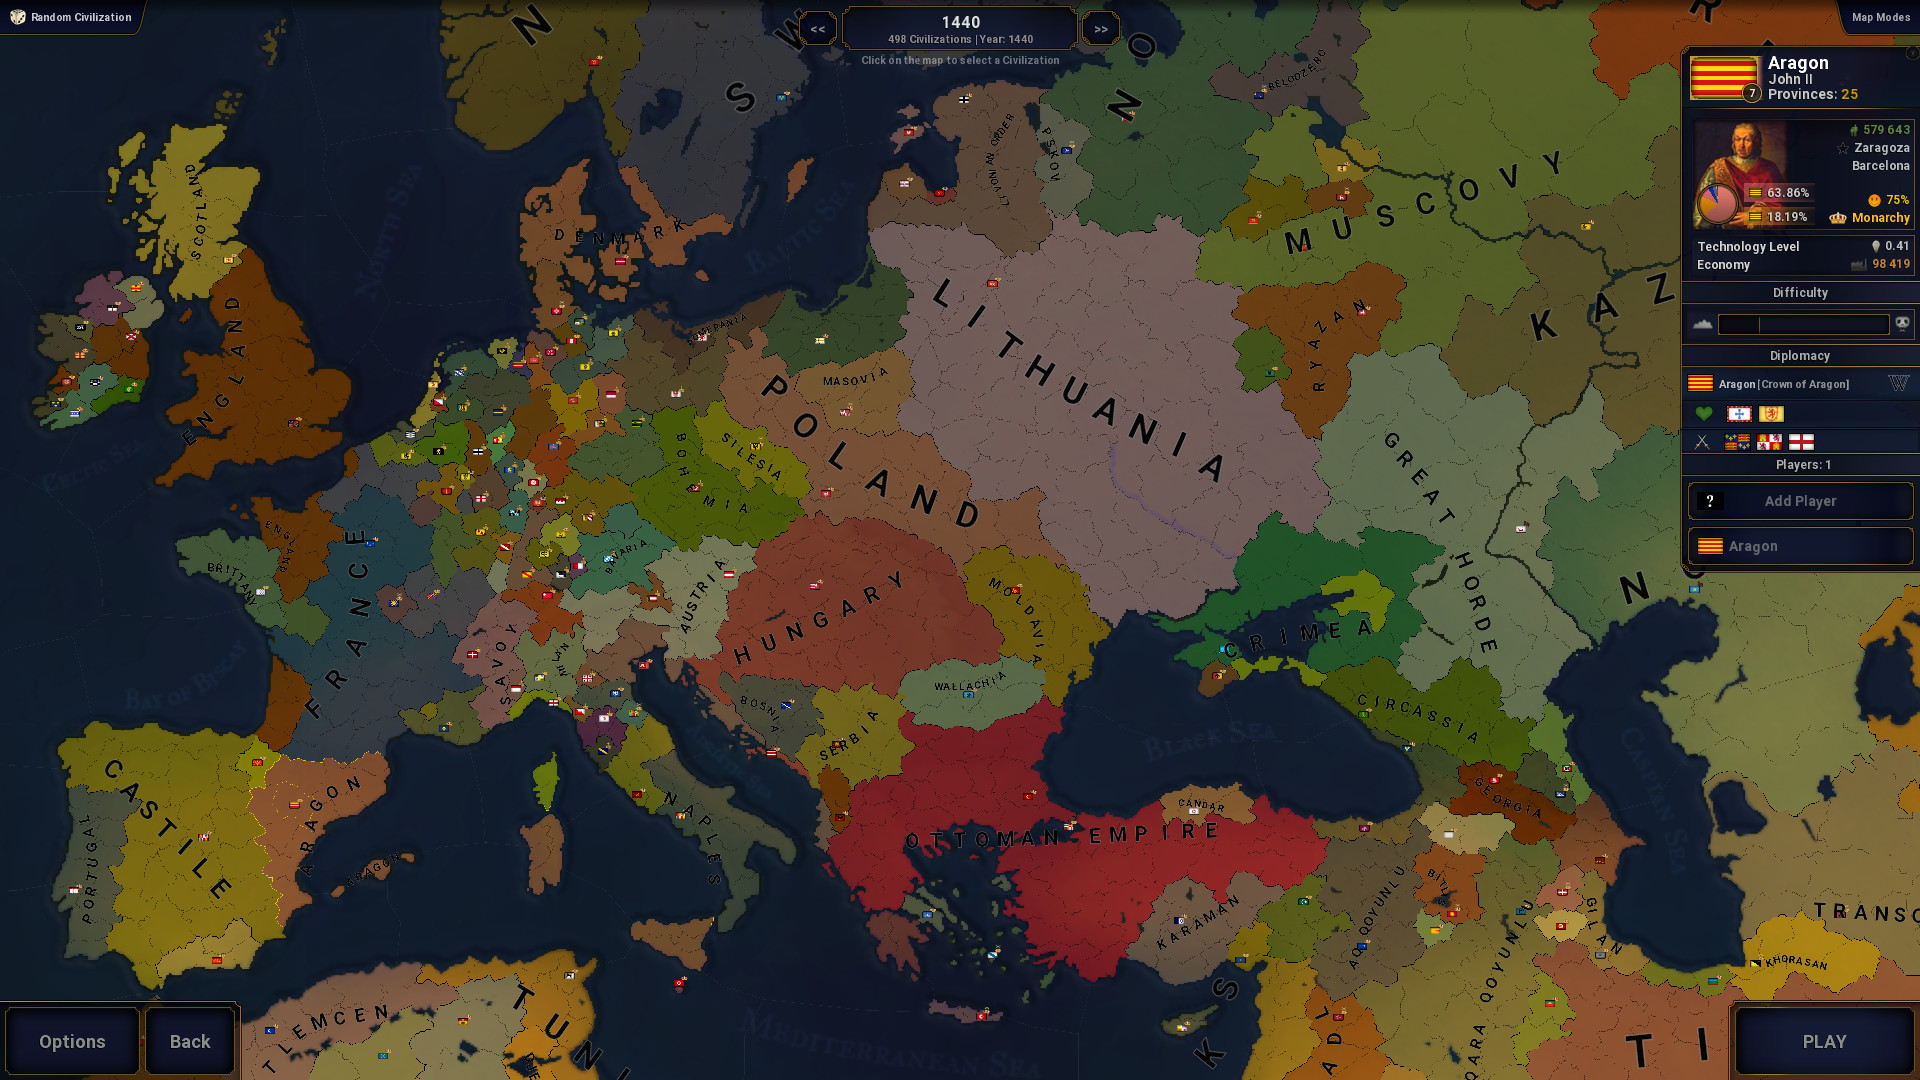 Mobile Strategy: Age of Civilizations II has a clear and easy to read political map, which translates well to mobile devices.